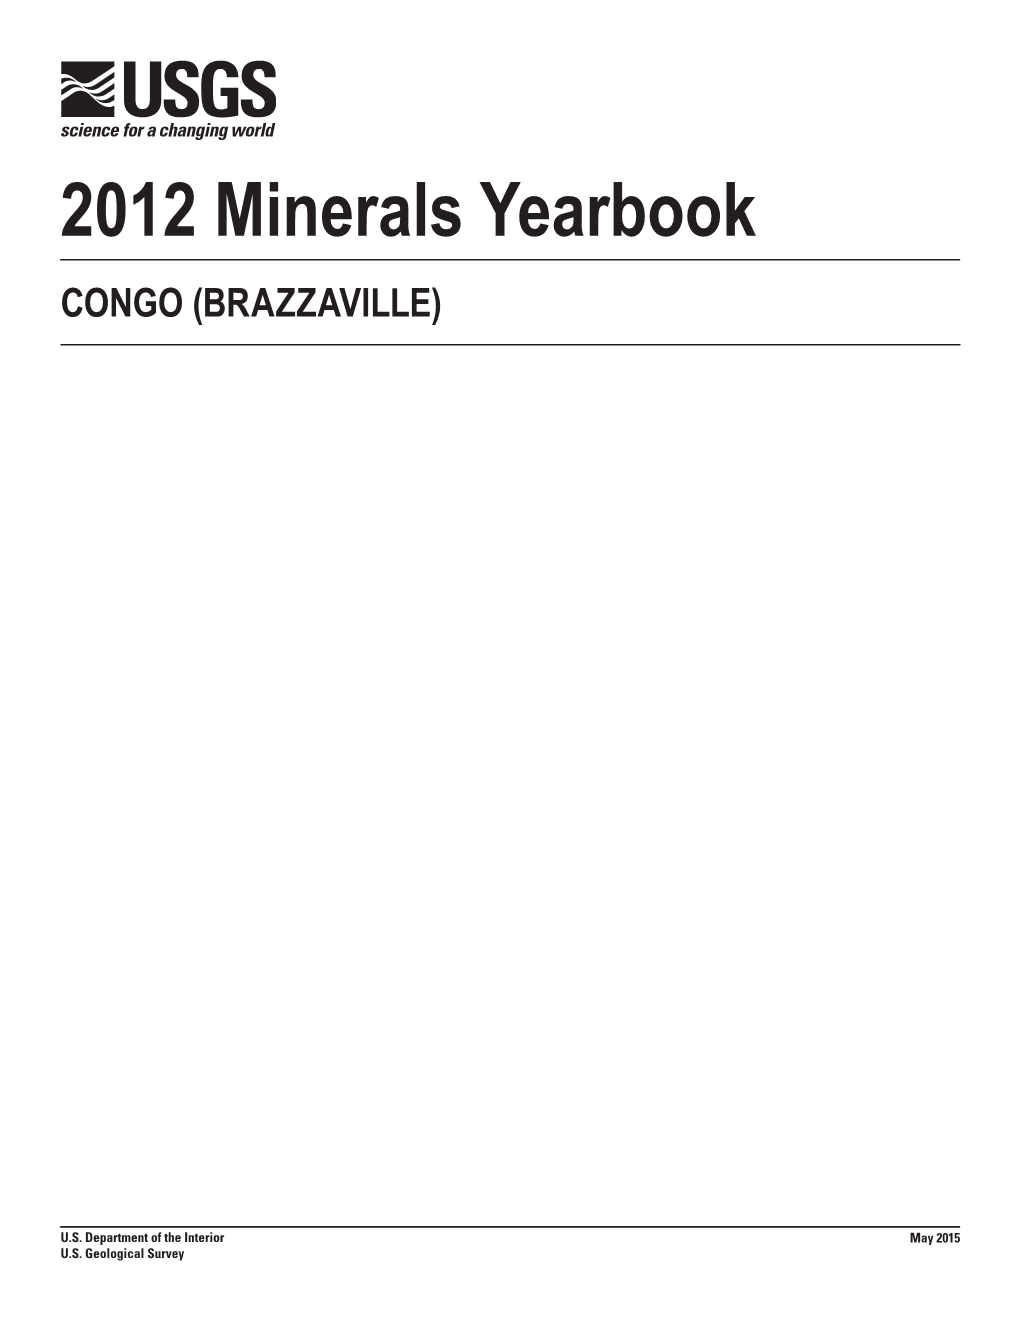 The Mineral Industry of Congo (Brazzaville) in 2012